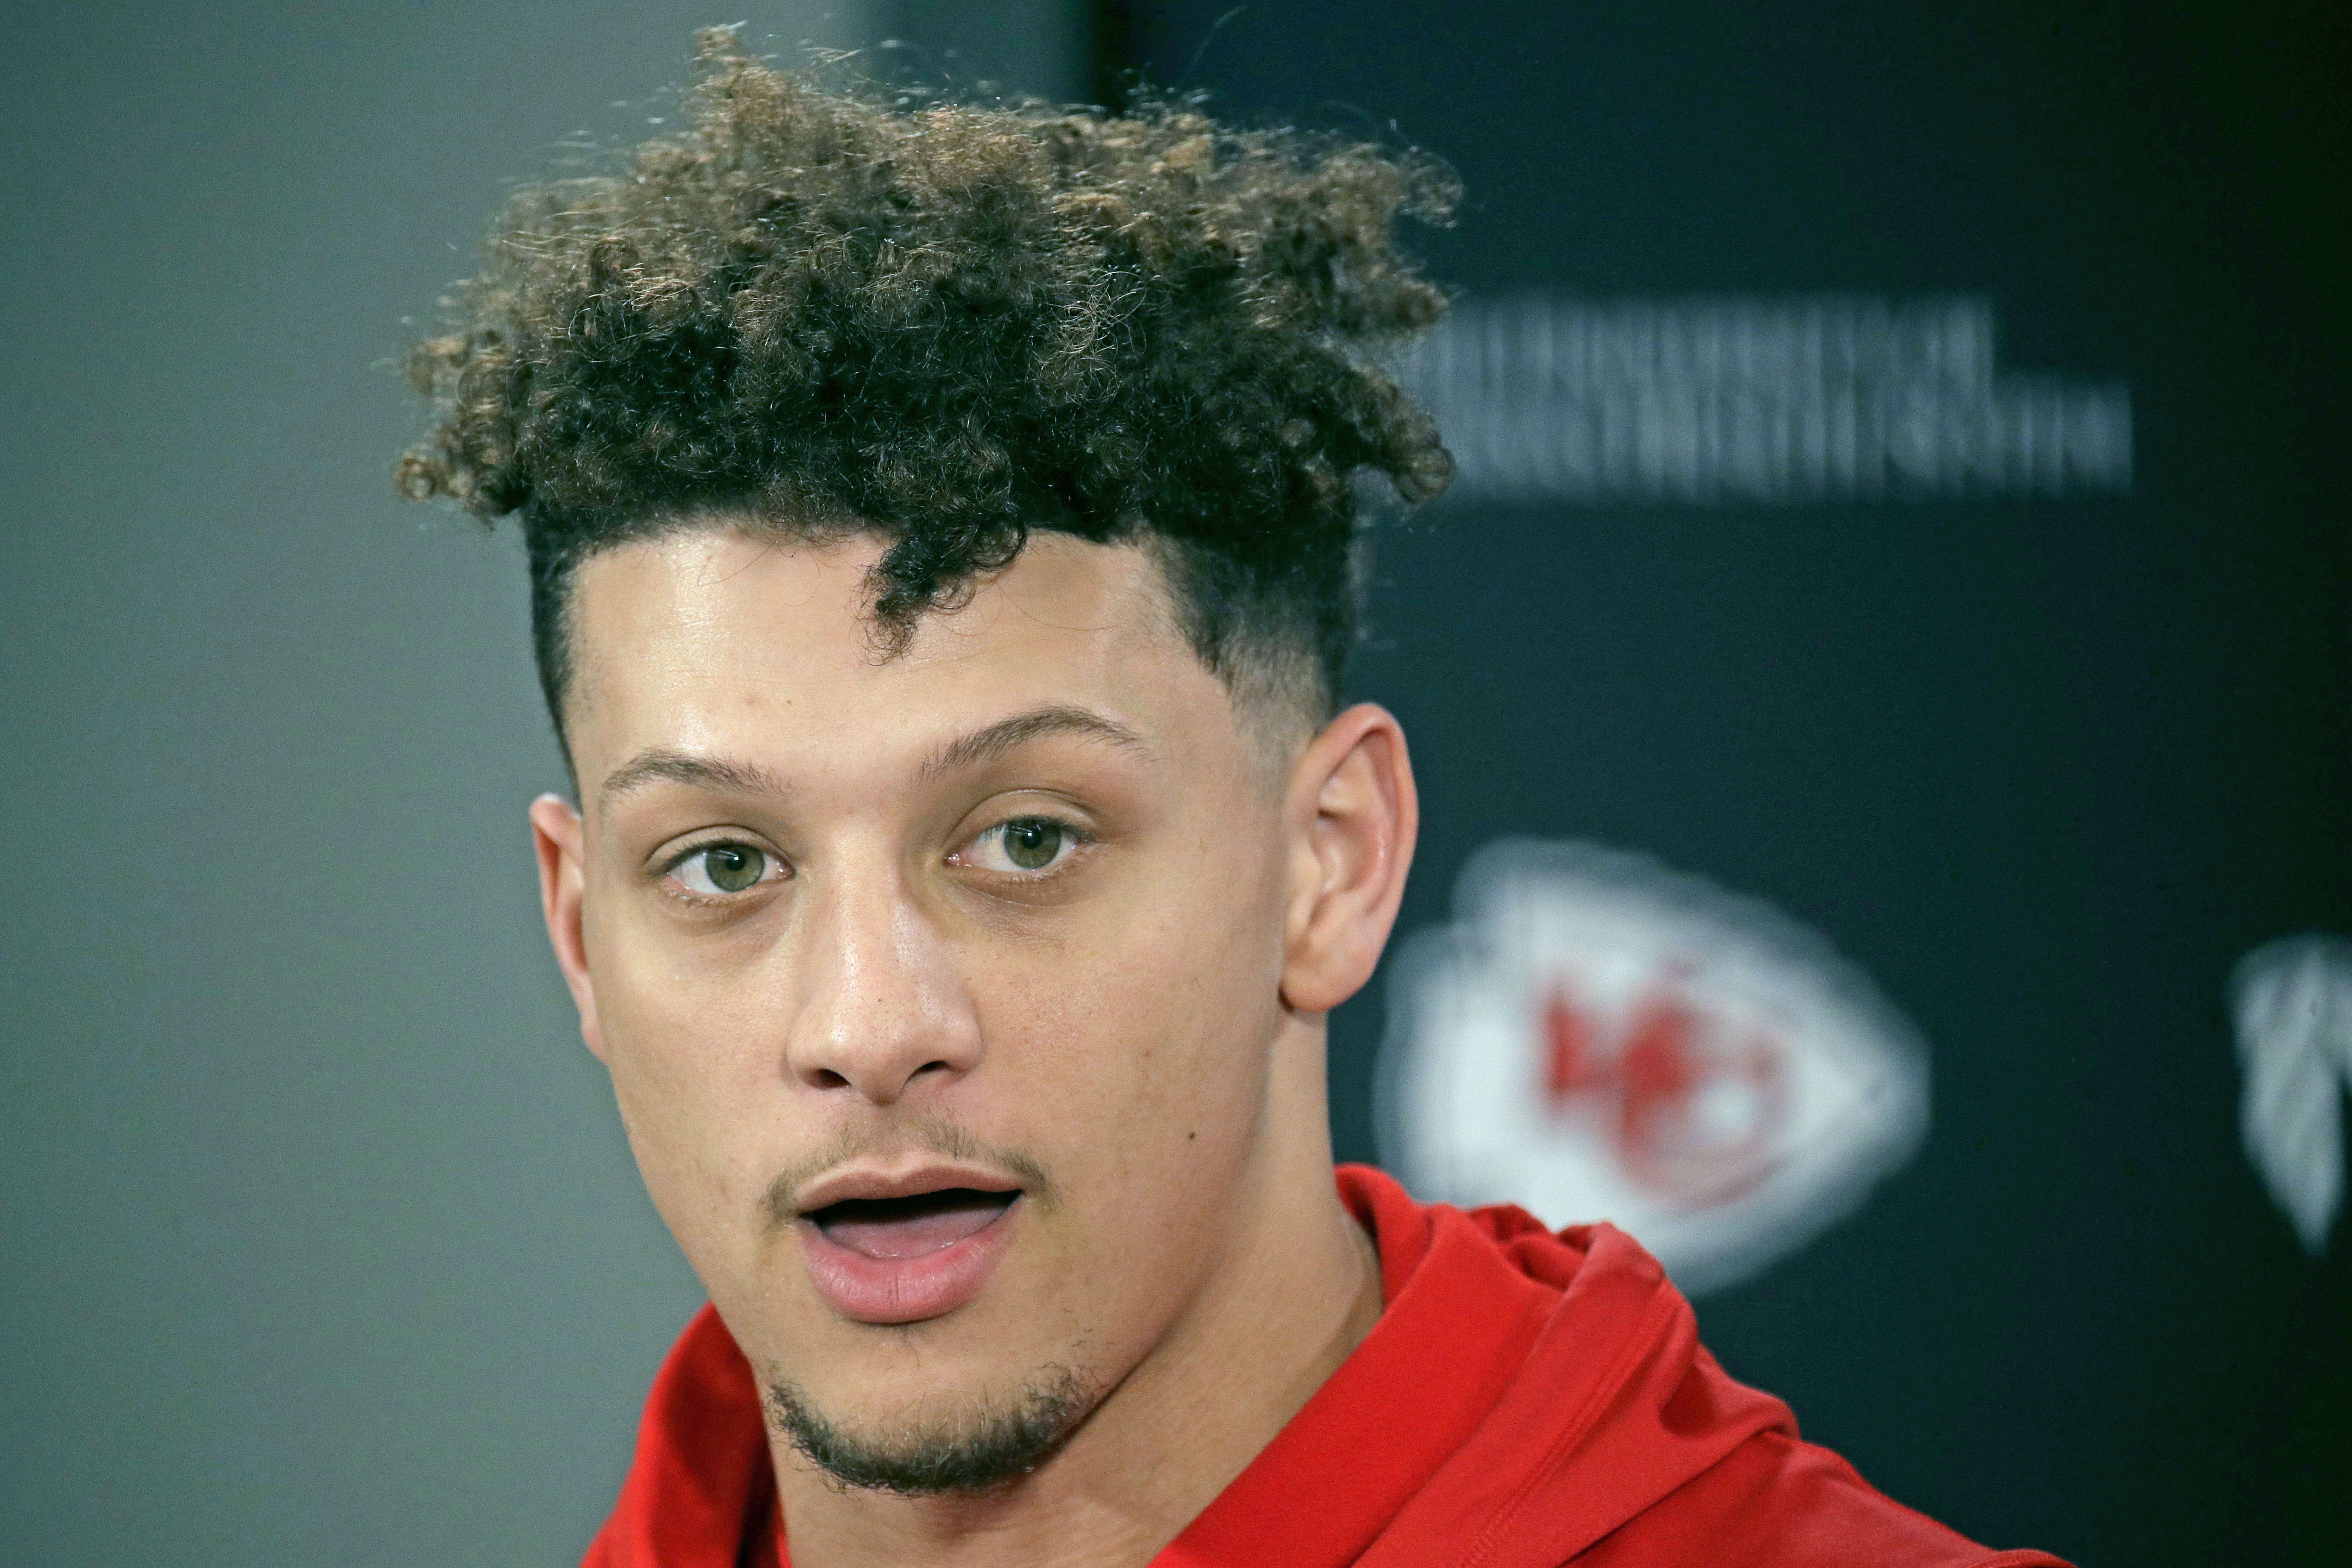 Mahomes can expect big money